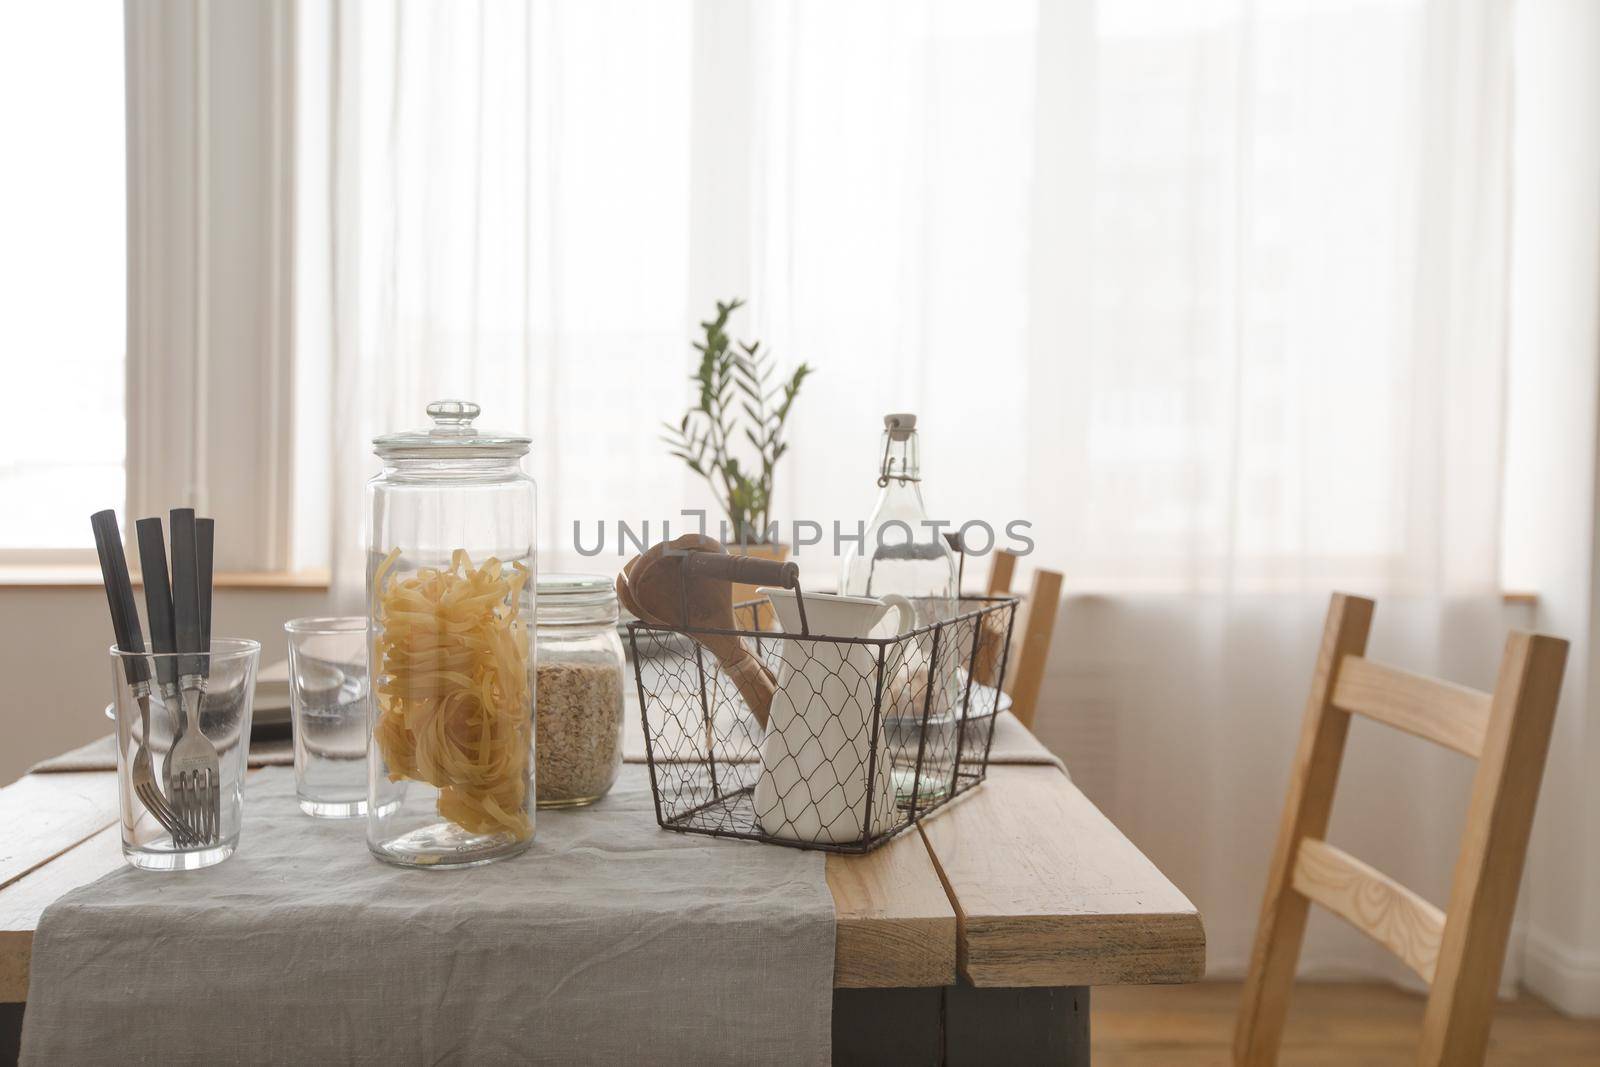 Interior view of wooden simple table with products and utensils in daylight.